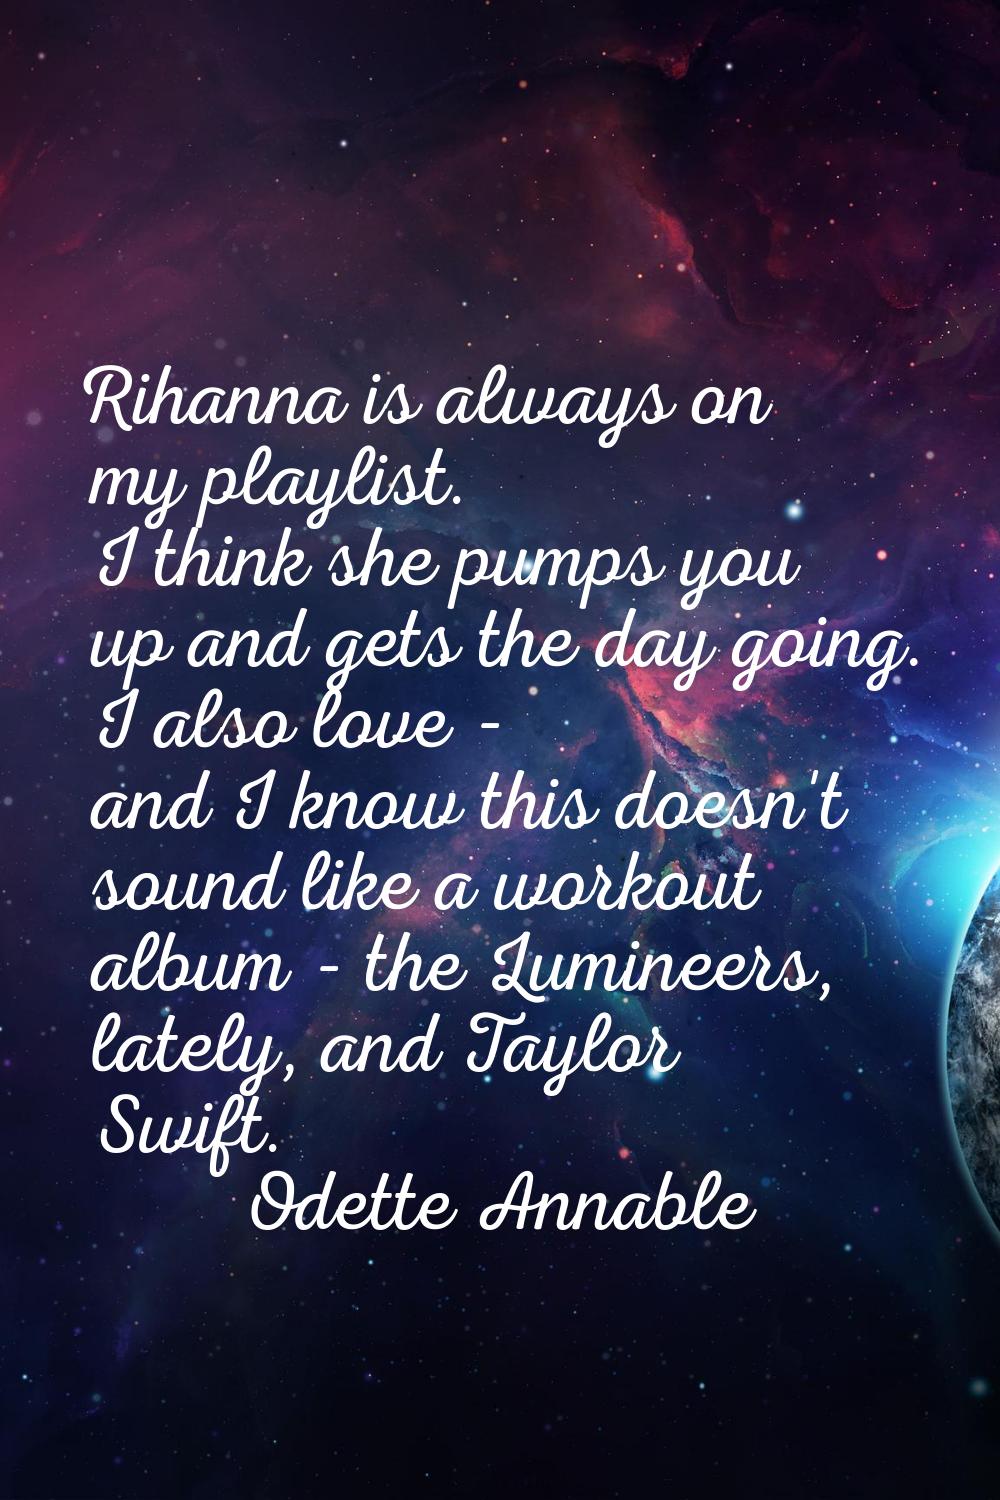 Rihanna is always on my playlist. I think she pumps you up and gets the day going. I also love - an